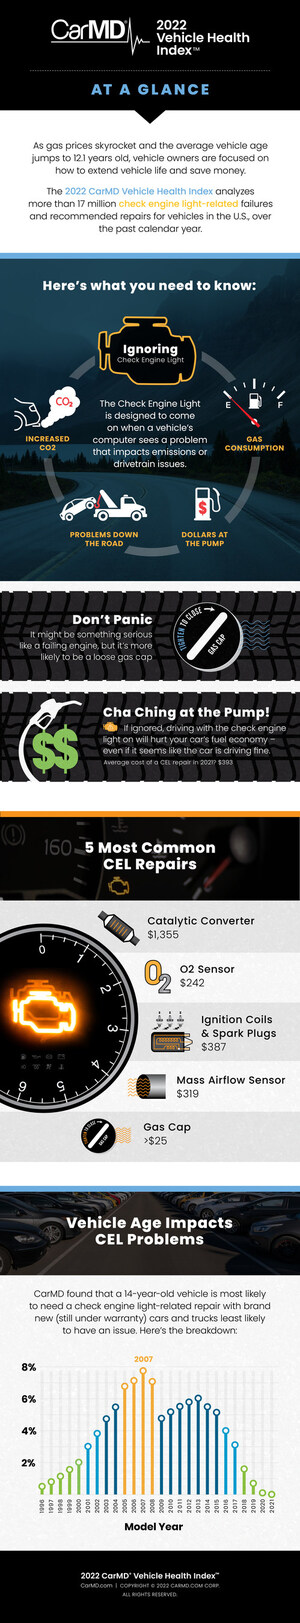 CarMD Publishes 2022 Vehicle Health Index of Check Engine Light Repair Trends